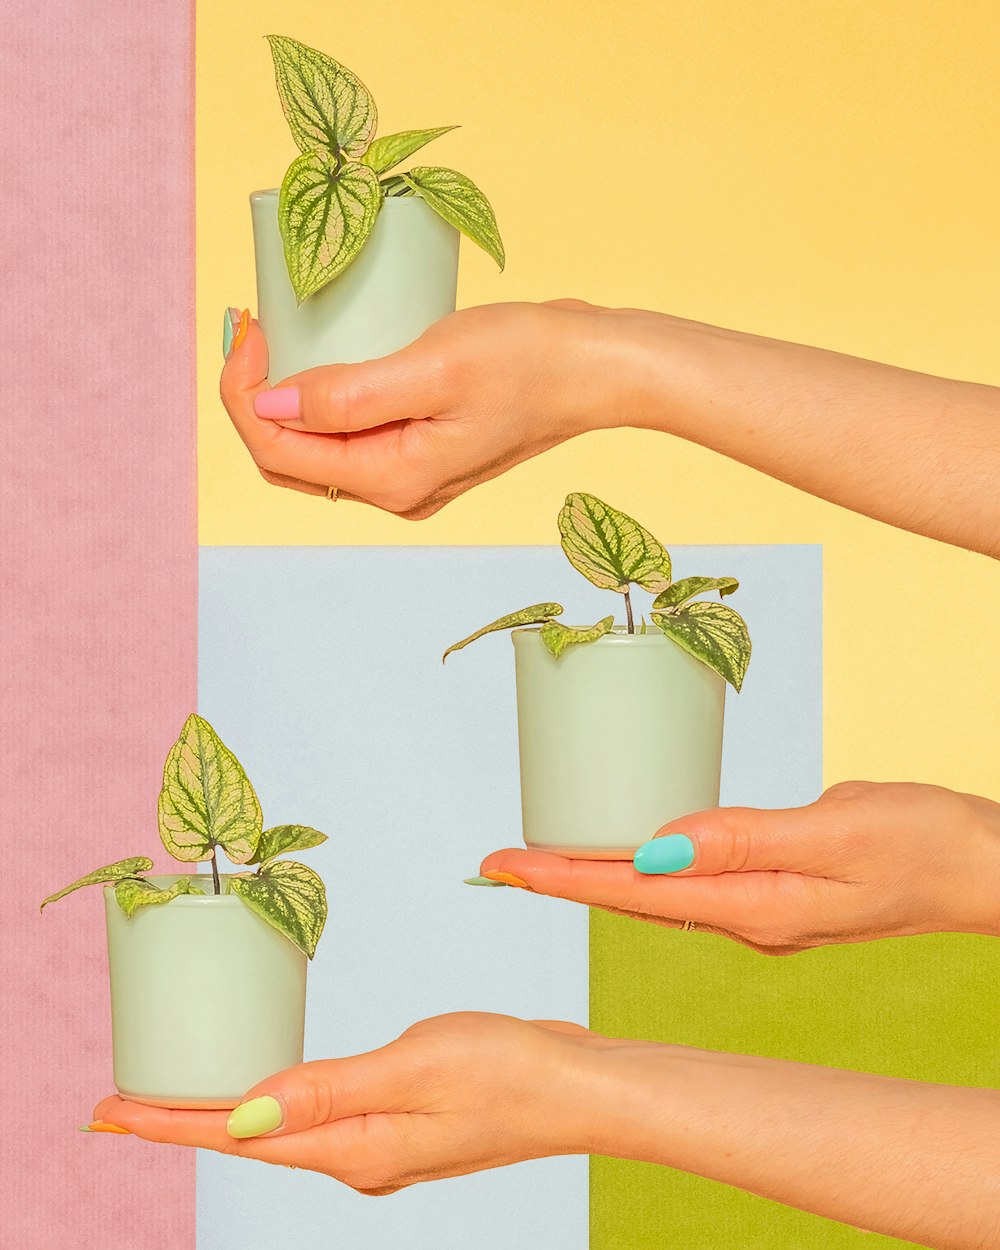 two hands holding small potted plants with green leaves